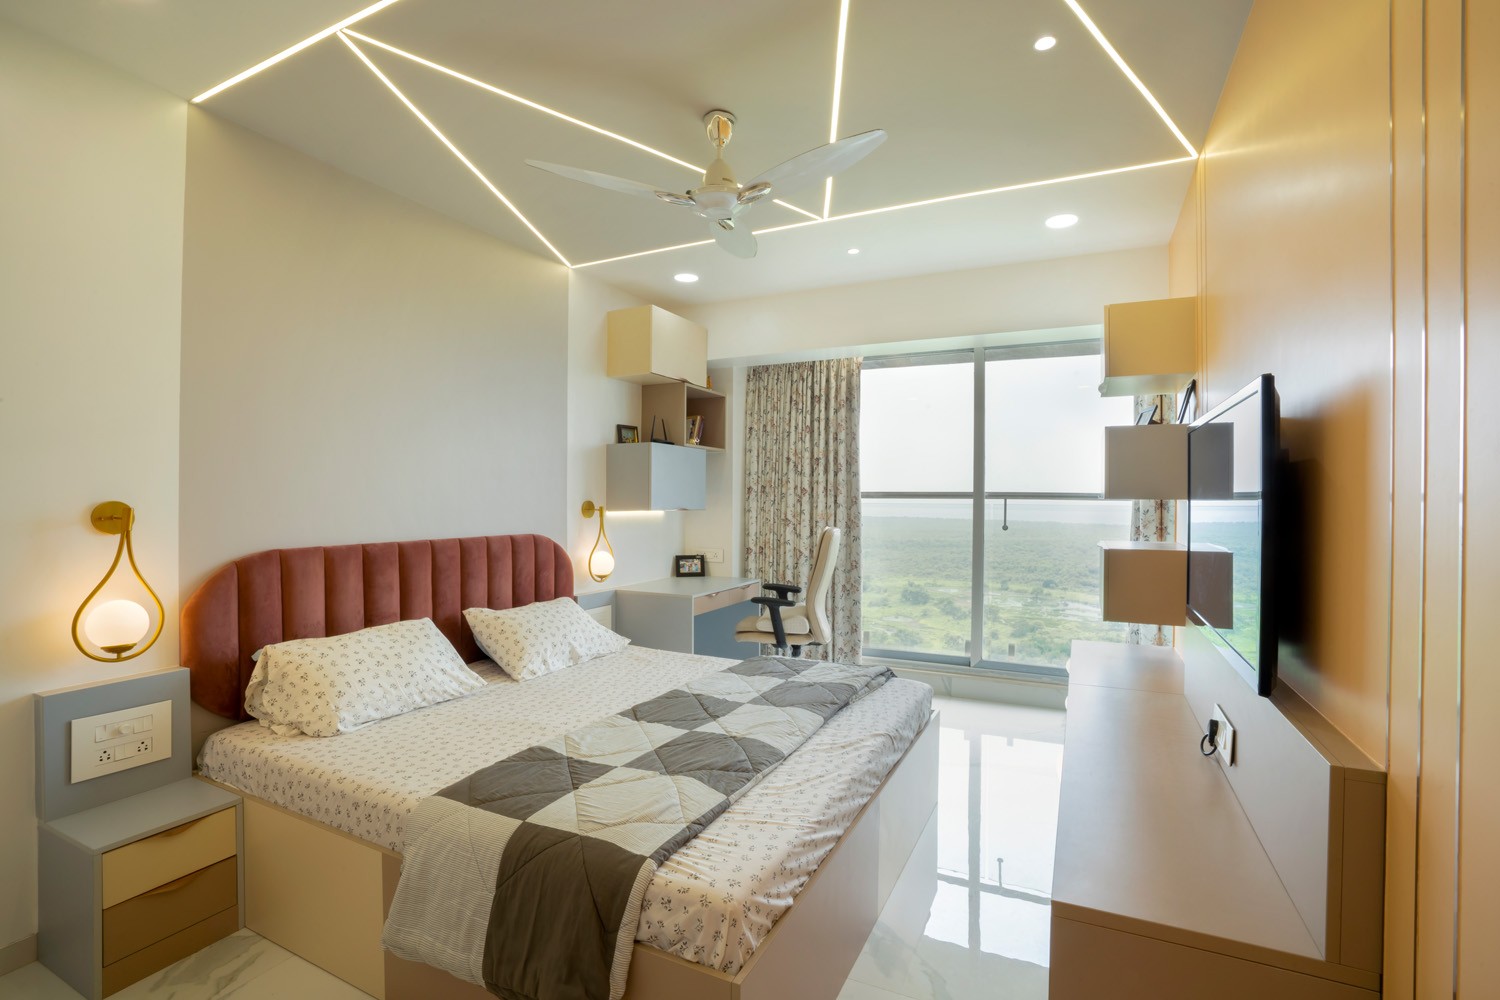 The Best Choice for Bed Room Interior Design